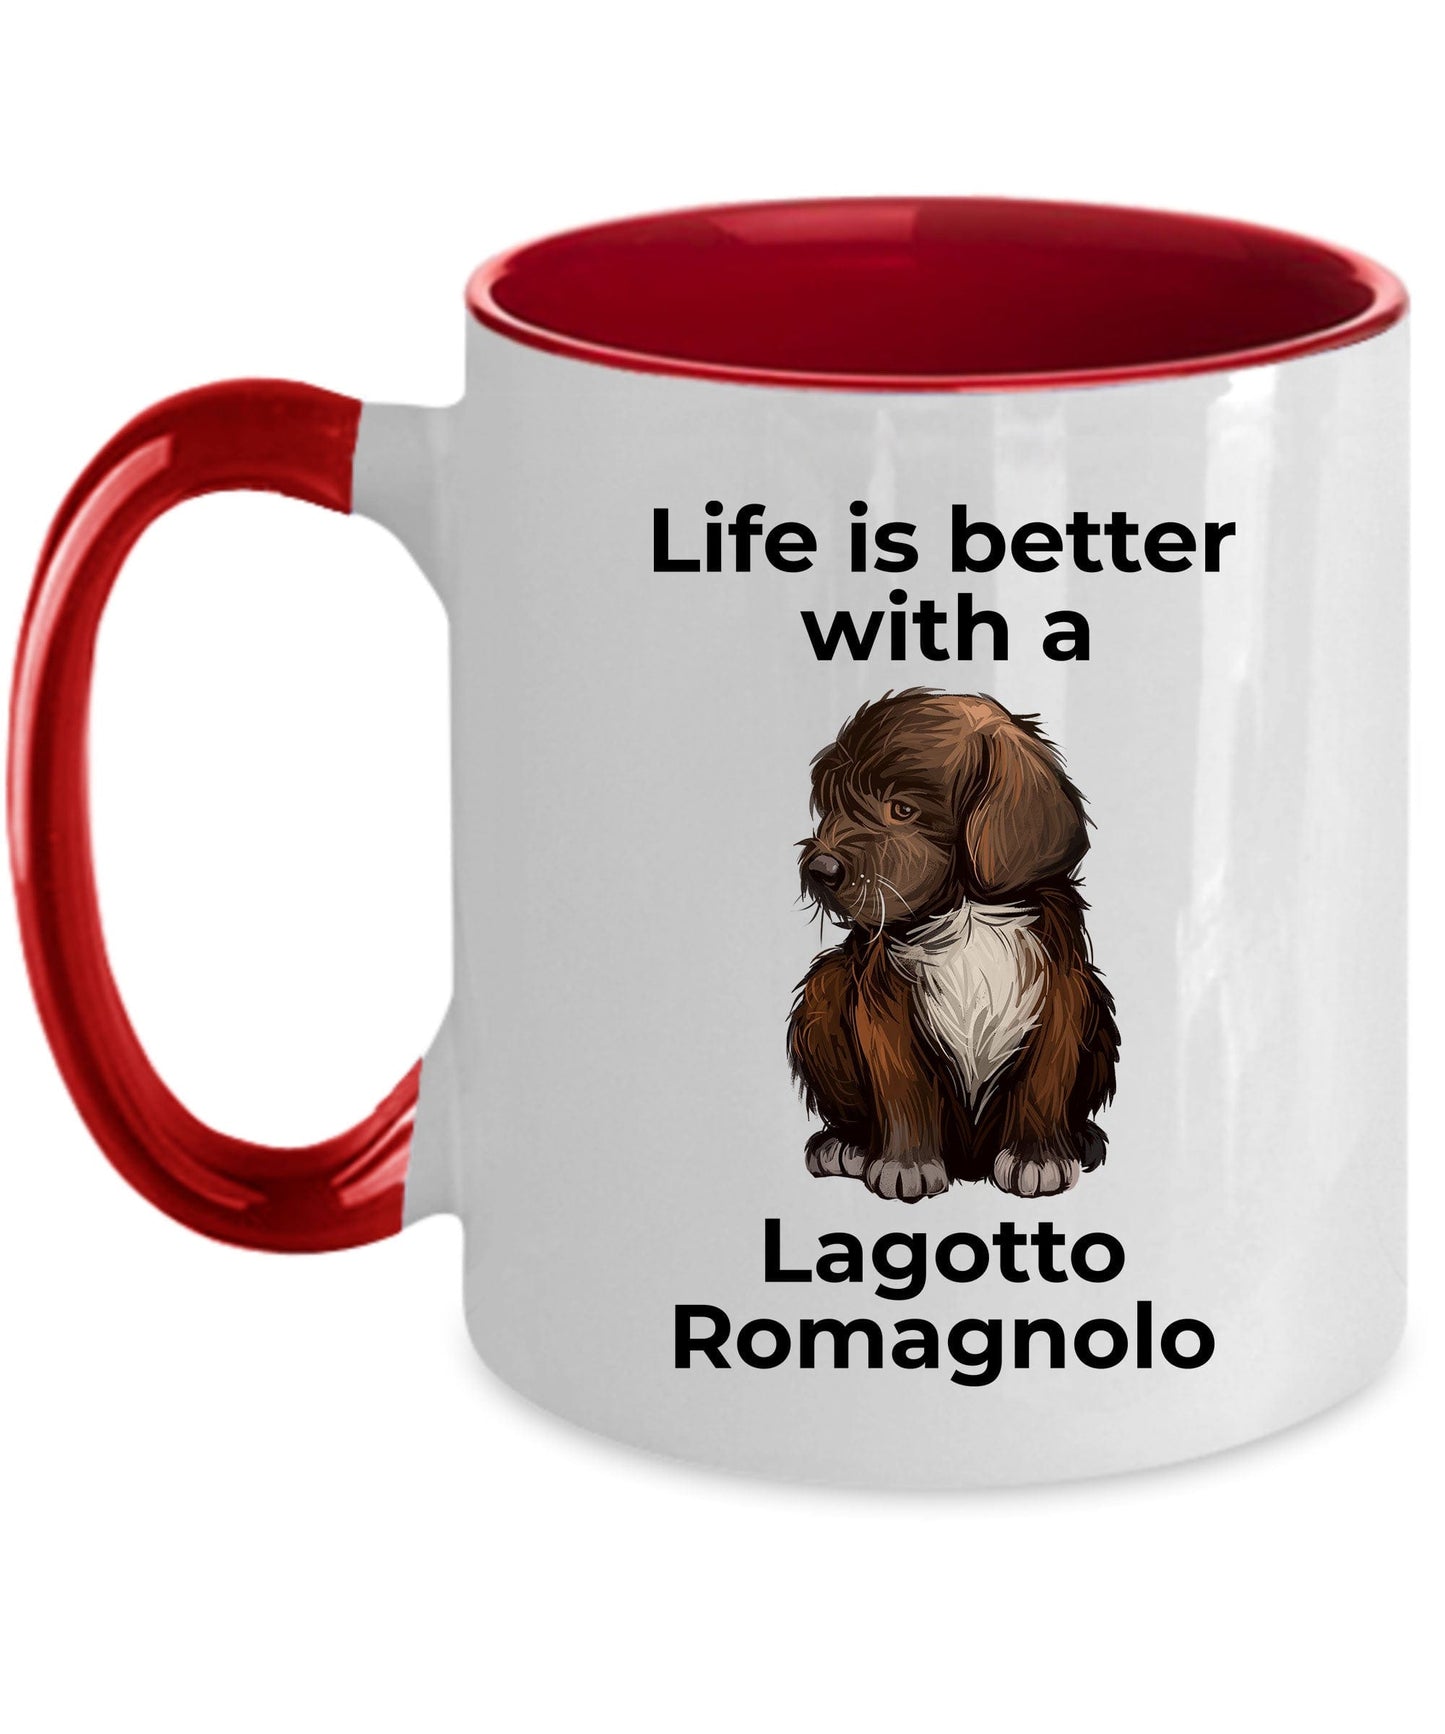 Lagotto Romagnolo Dog Lover ceramic coffee mug - Life is better with a Lagotto Romagolo